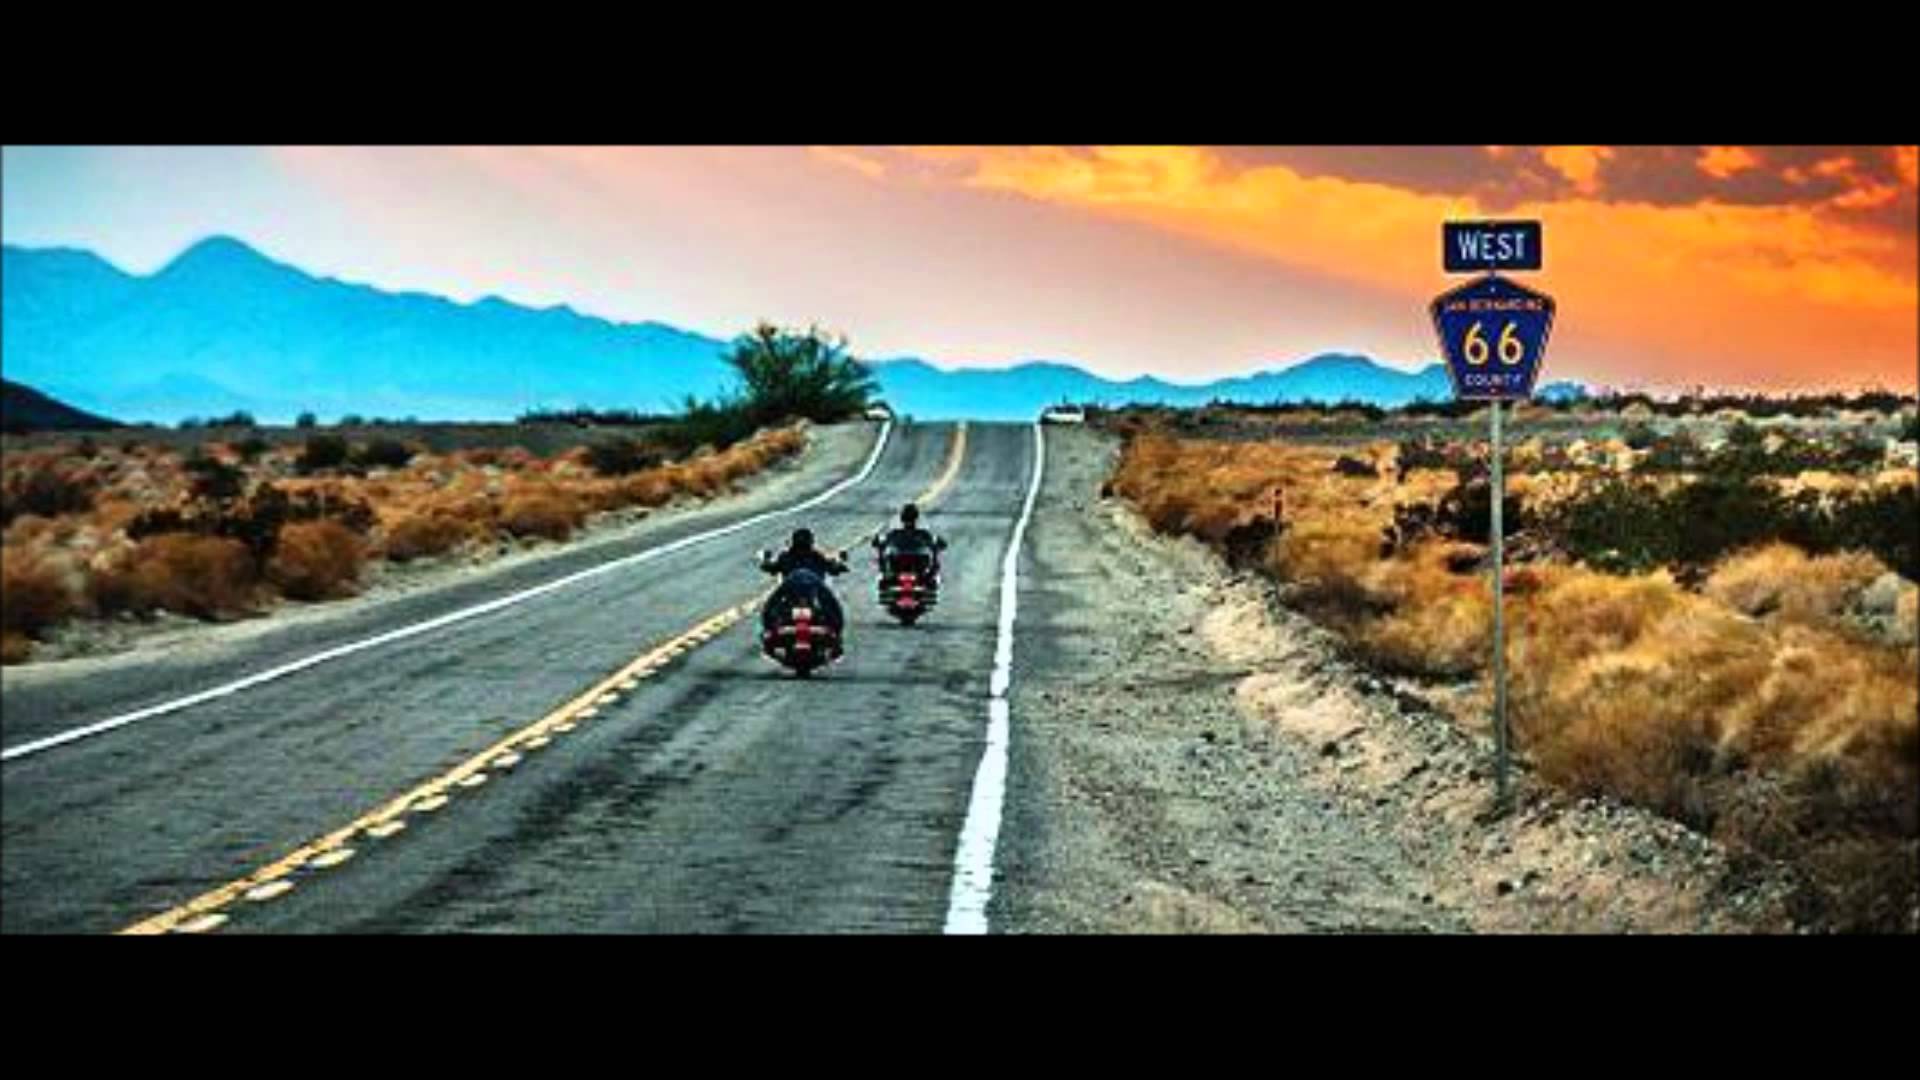 Route 66 & Harley